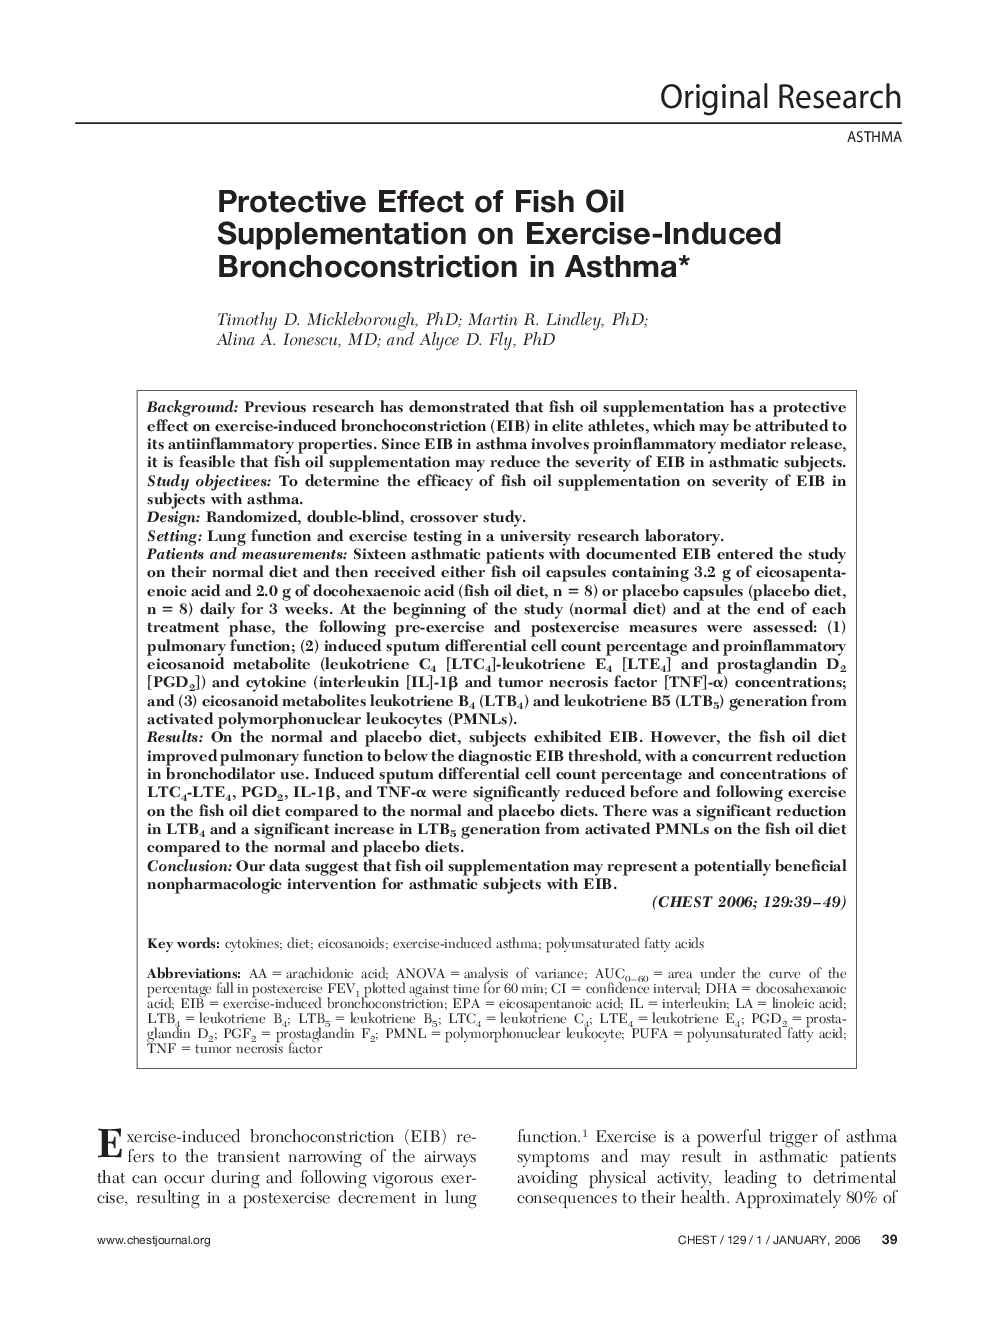 Protective Effect of Fish Oil Supplementation on Exercise-Induced Bronchoconstriction in Asthma 